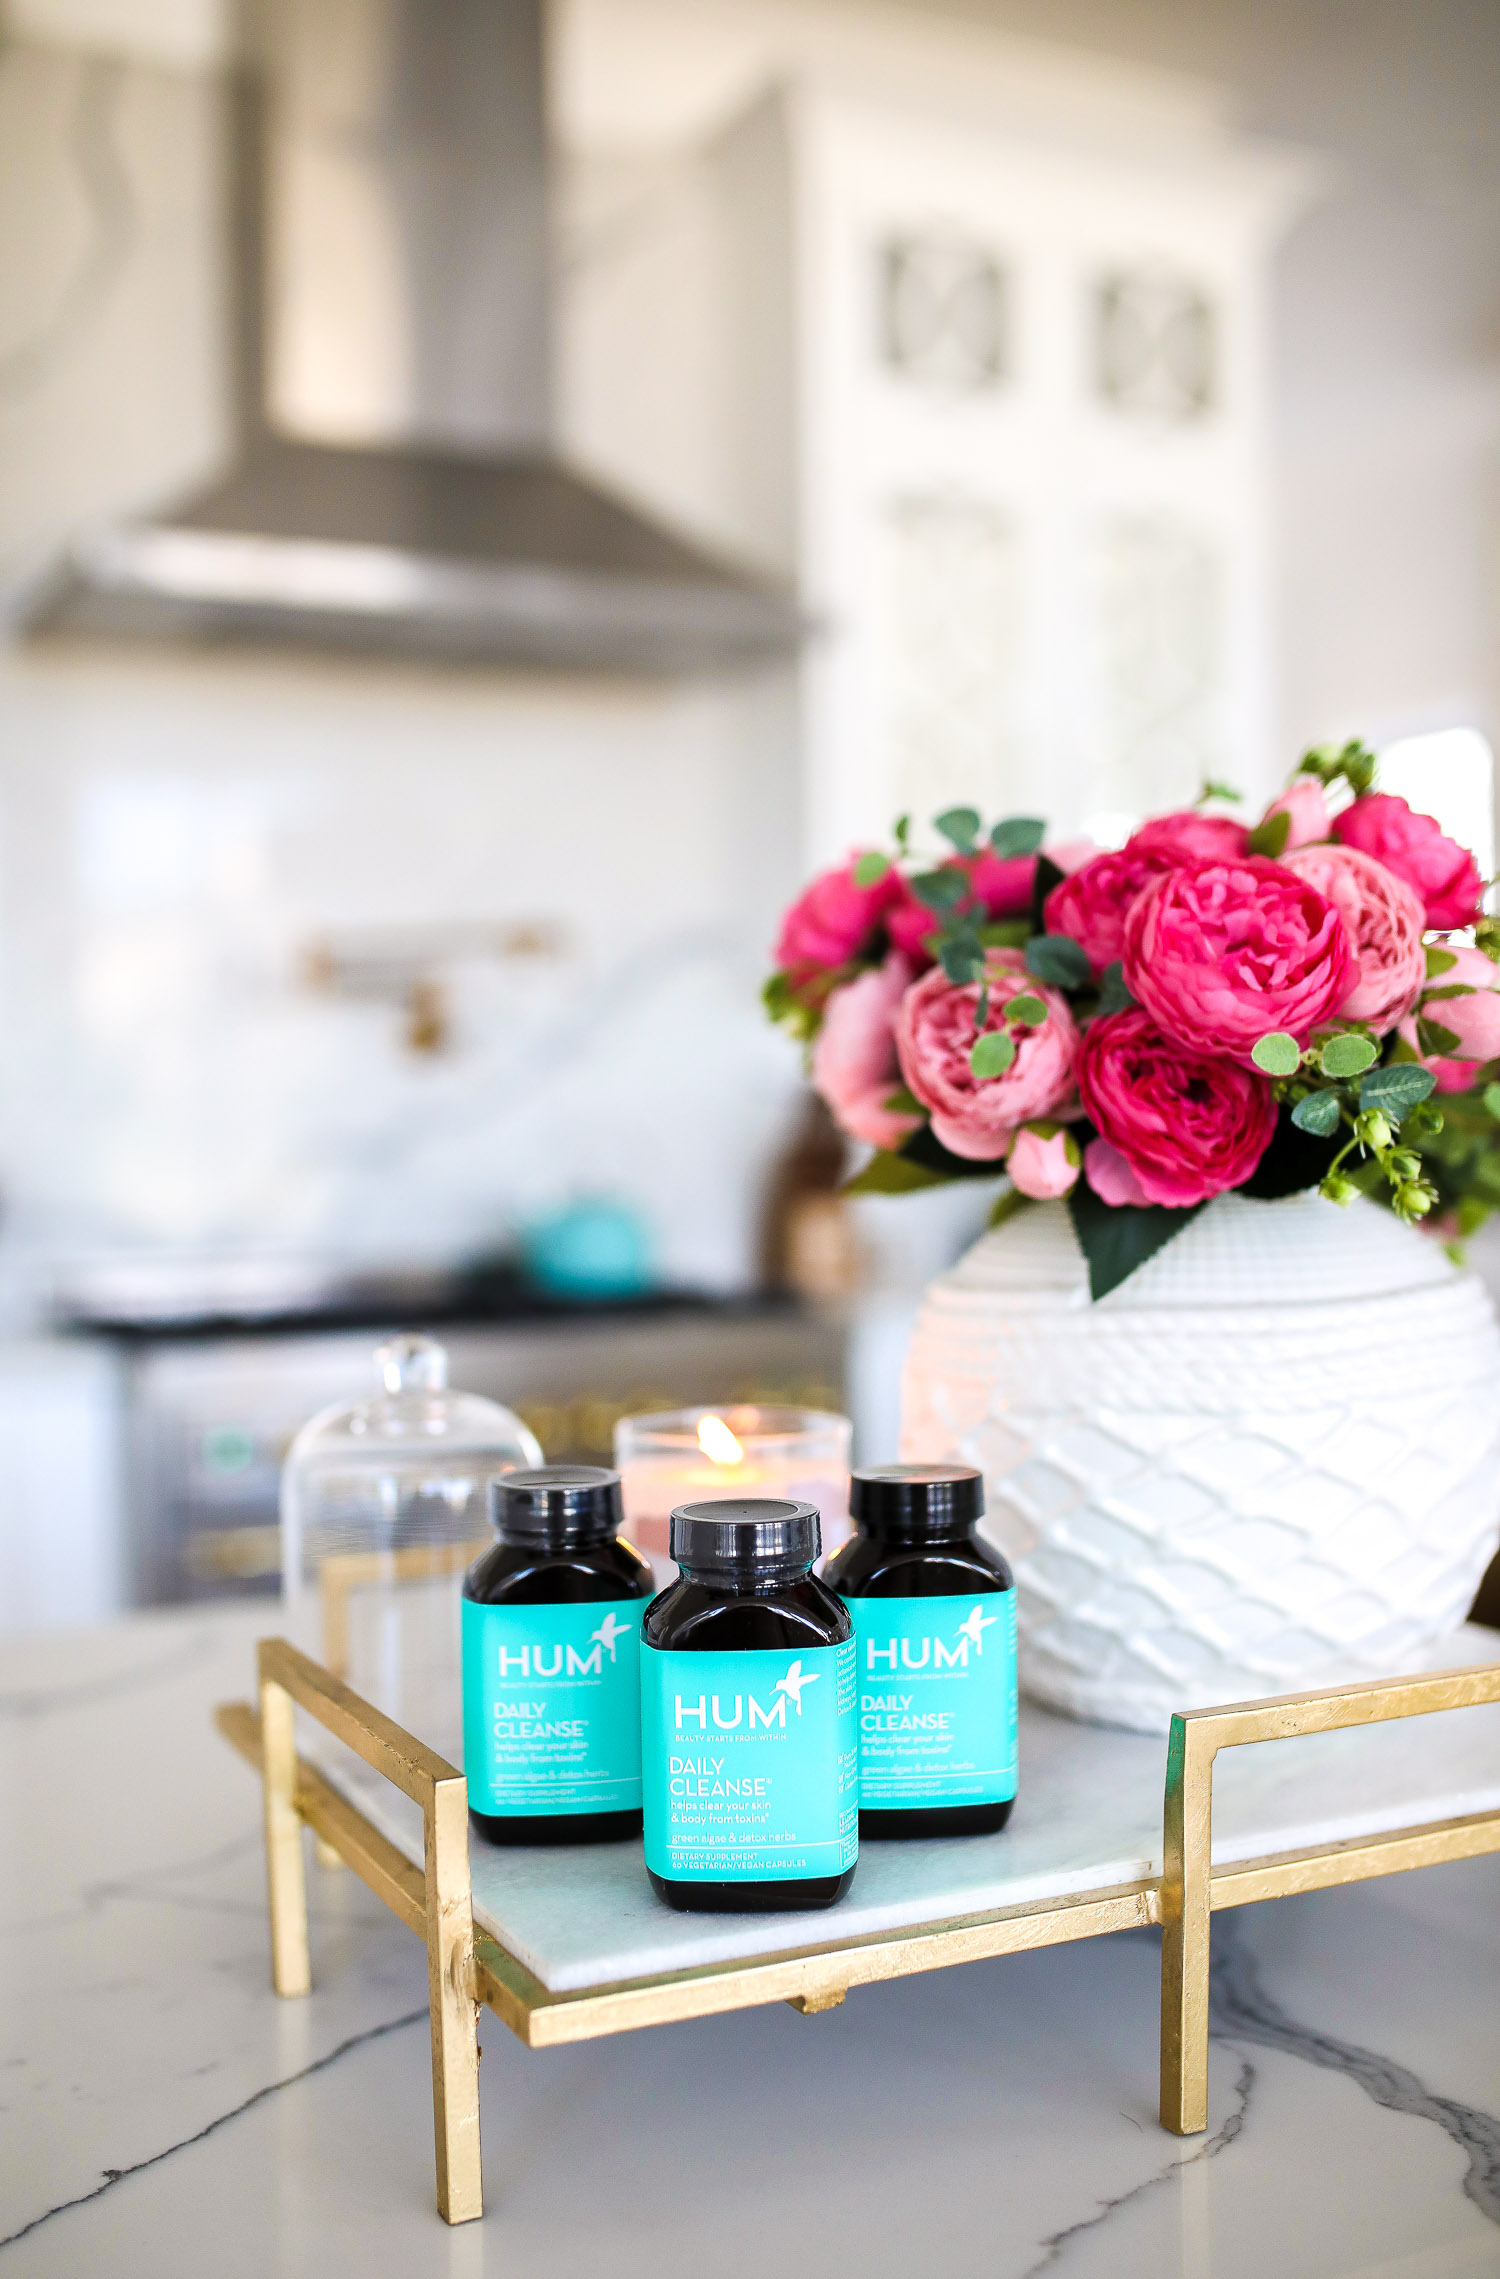 hum nutrition daily cleanse supplements, skin clearing vitamins, green algae vitamins, emily gemma skincare routine | Hum Daily Cleanse by popular US lifestyle blog, The Sweetest Thing: image of three bottles of Hum Daily Cleanse supplements next to a white ceramic vase filled with pink roses. 